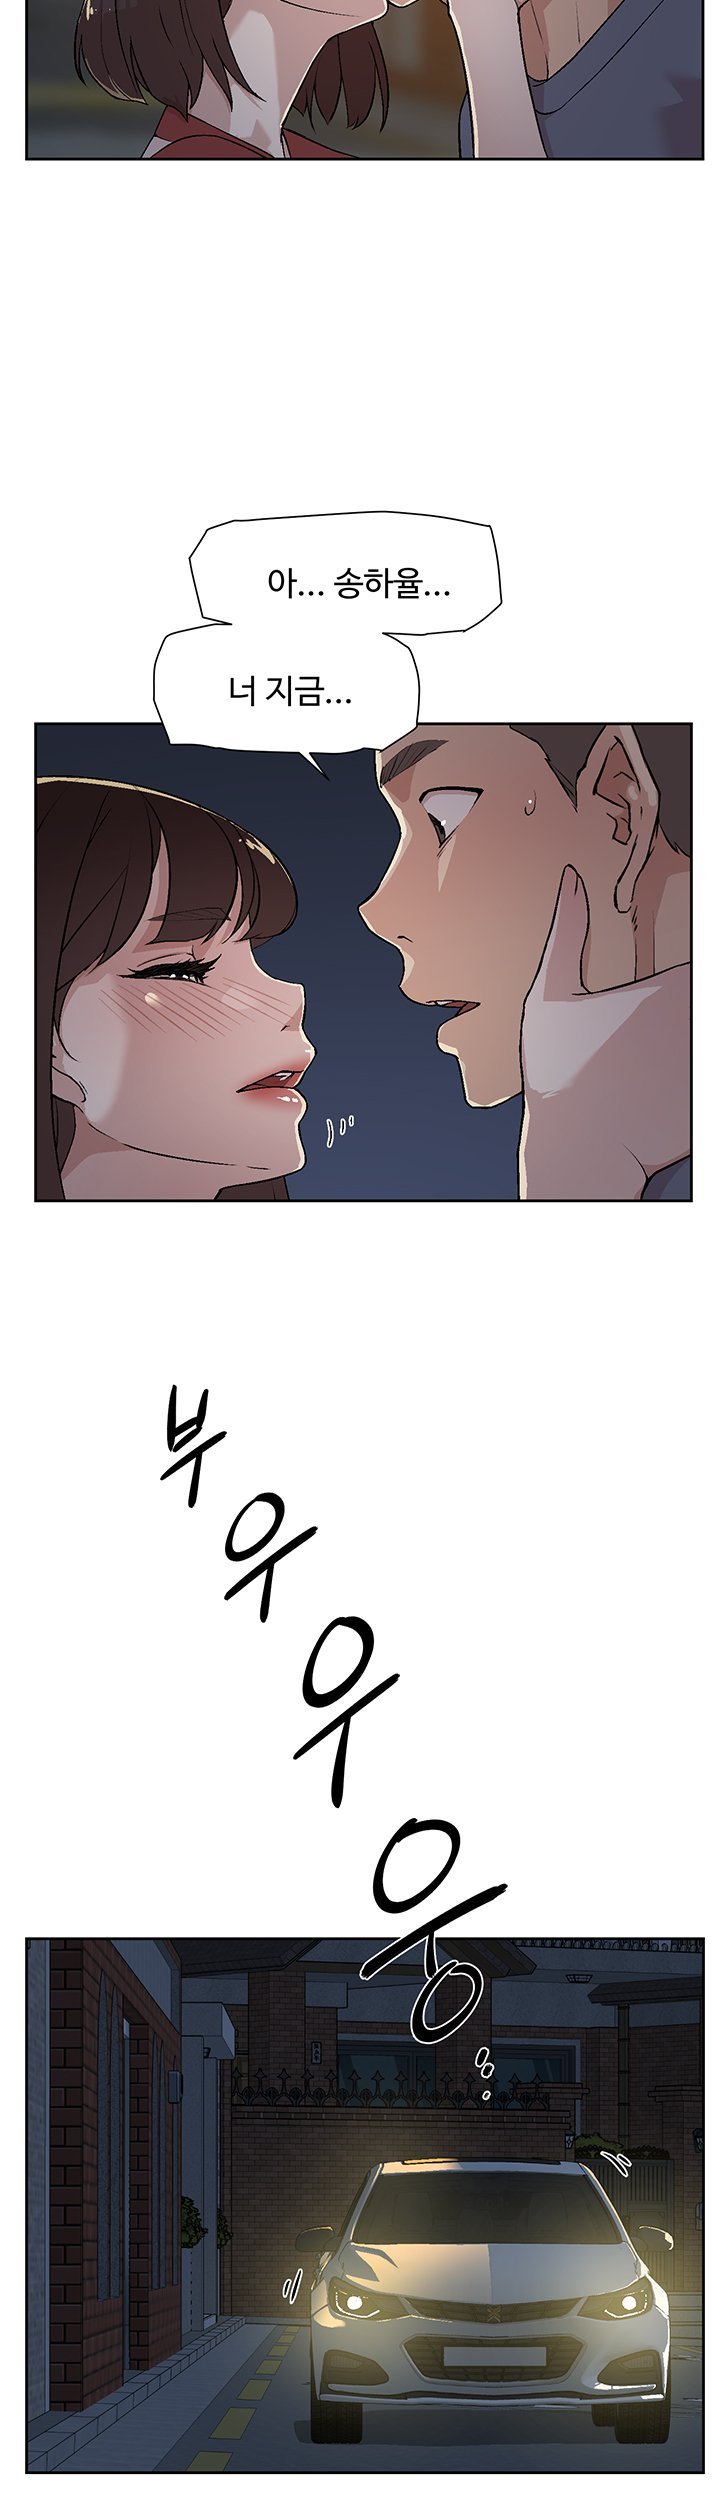 everything-about-best-friend-raw-chap-3-35